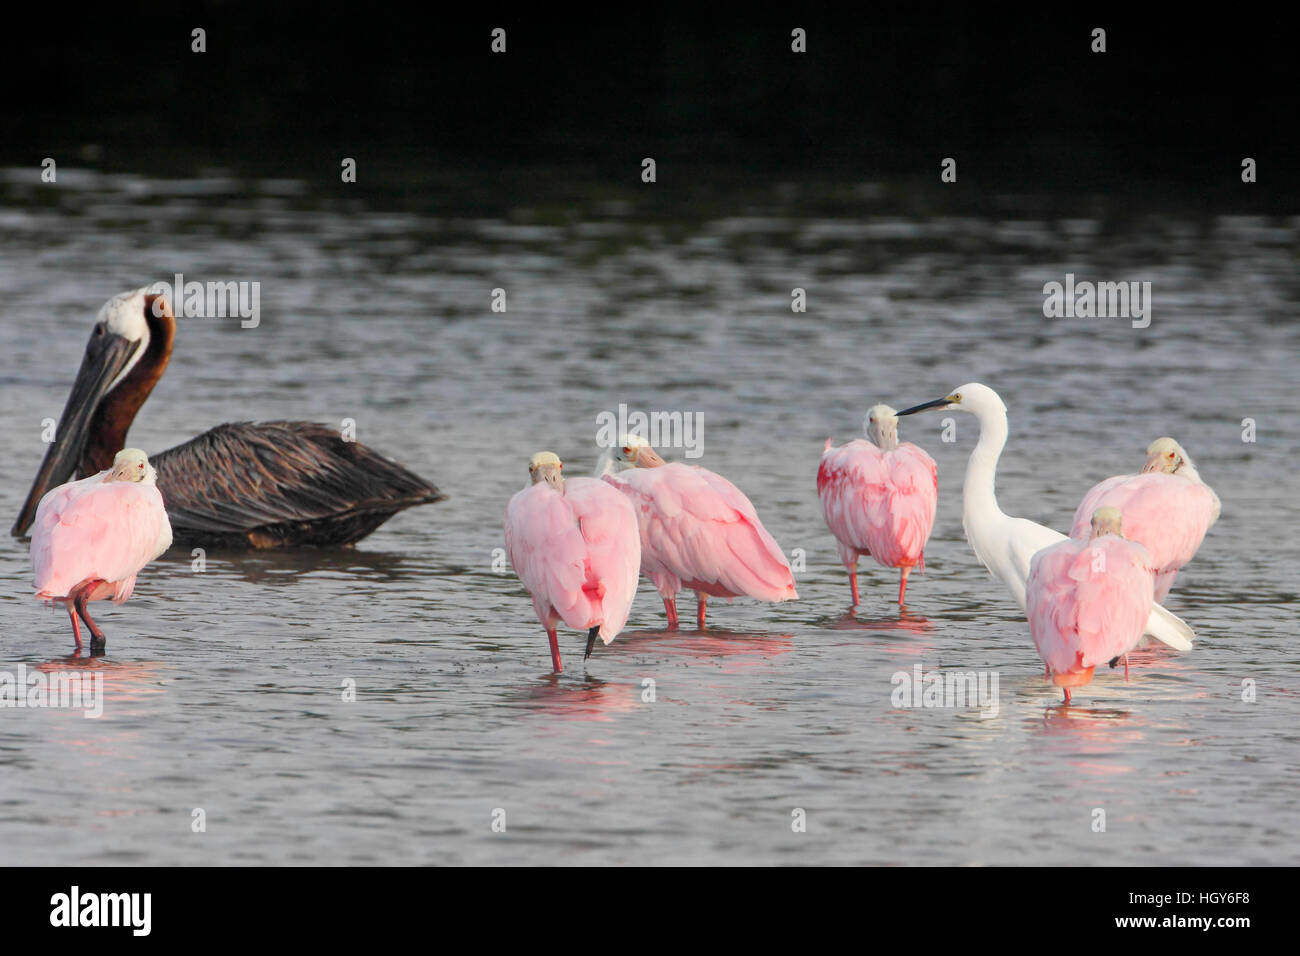 Roseate spoonbills (Platalea ajaja) standing in shallow water with Brown Pelican and Snowy Egret, Ding Darling NWR, Florida, USA Stock Photo